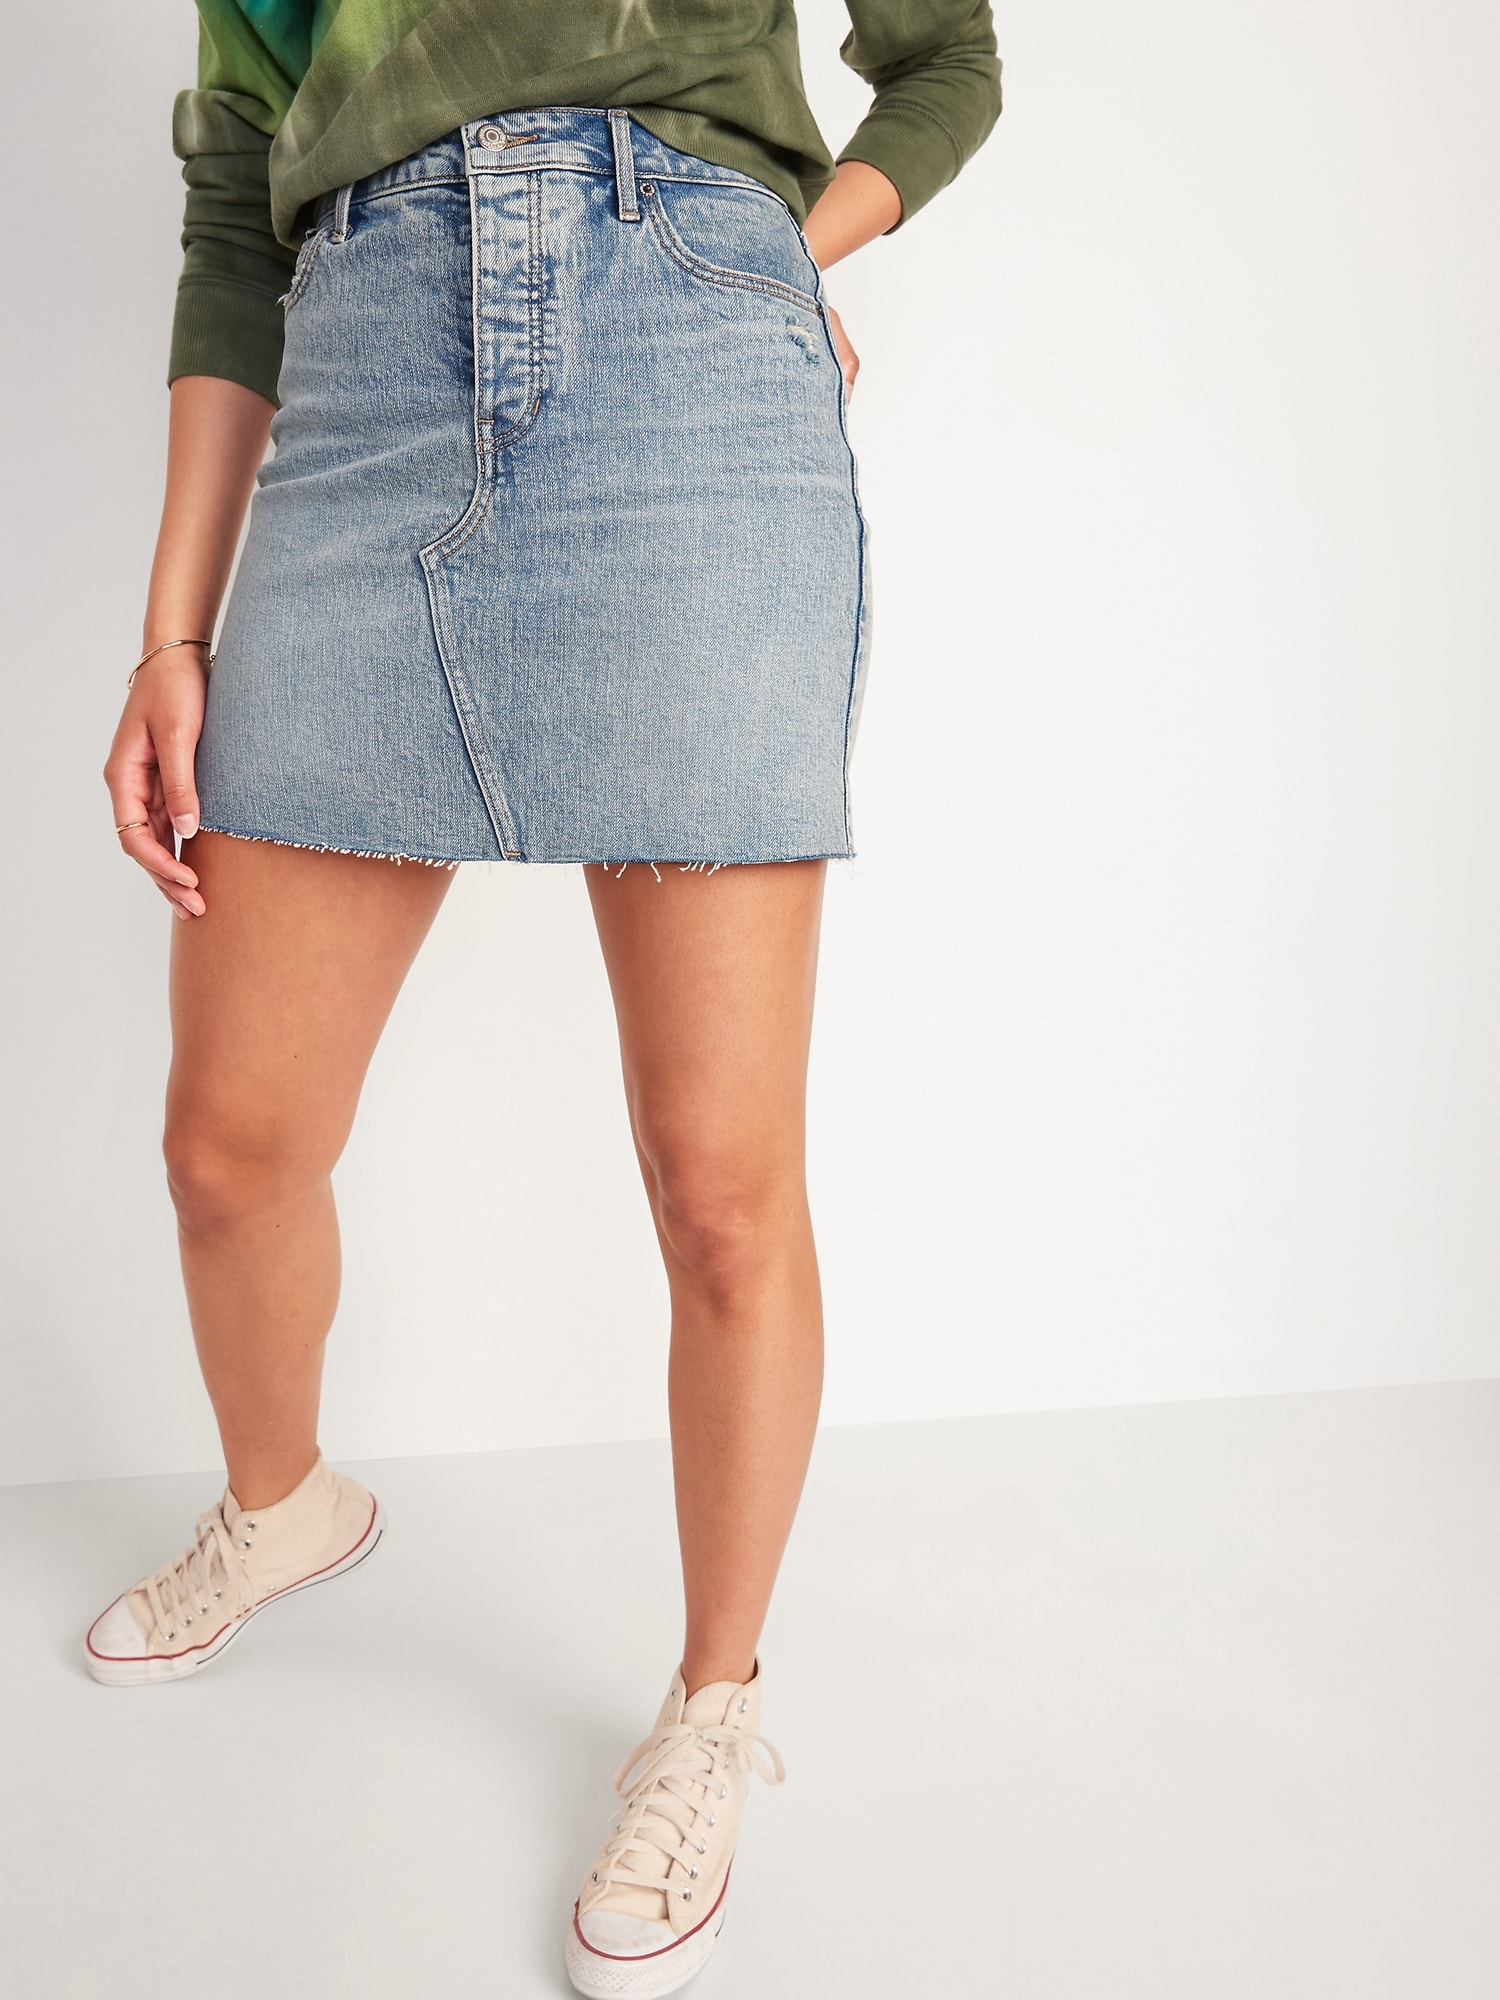 Oldnavy High-Waisted Button-Fly Ripped Cut-Off Jean Skirt for Women